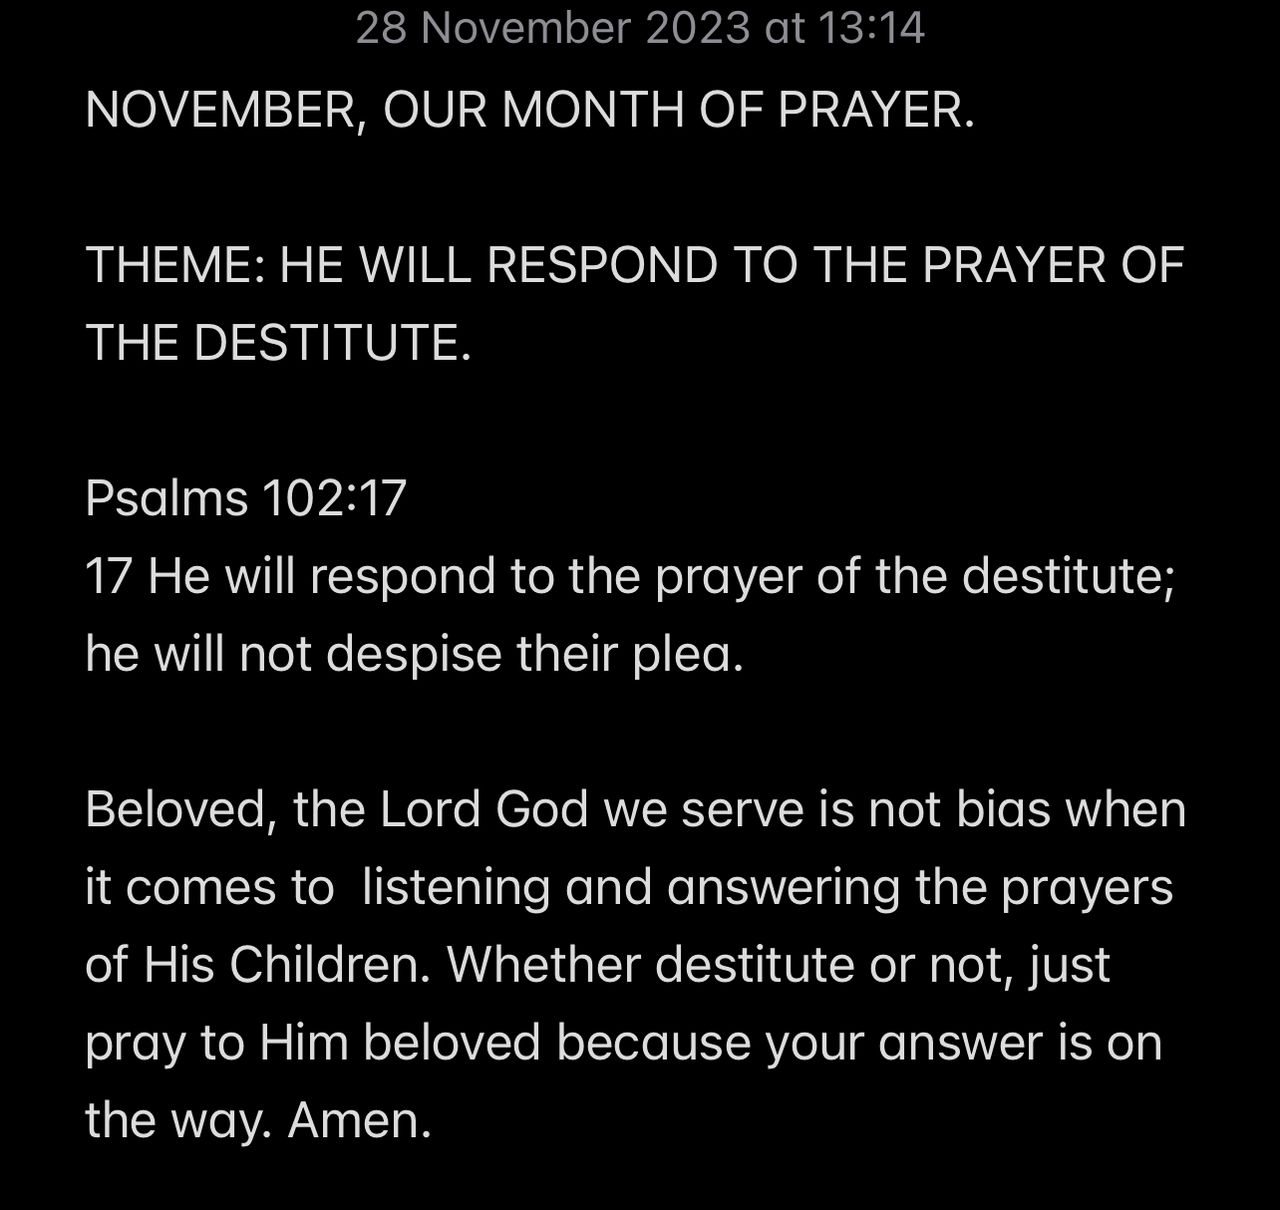 HE WILL RESPOND TO THE PRAYER OF THE DESTITUTE.